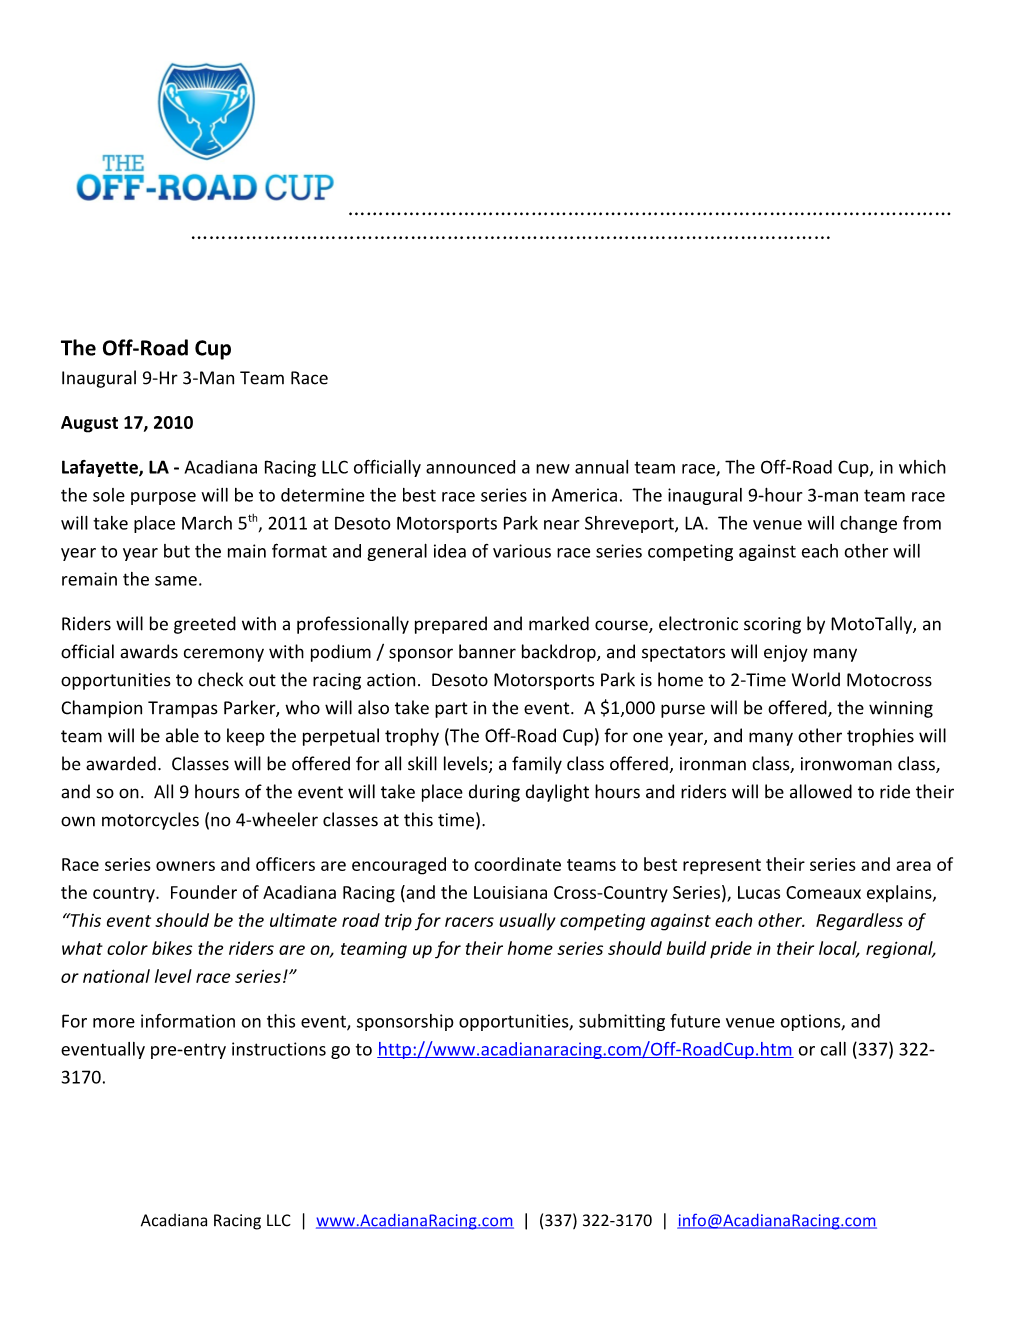 The Off-Road Cup Inaugural 9-Hr 3-Man Team Race